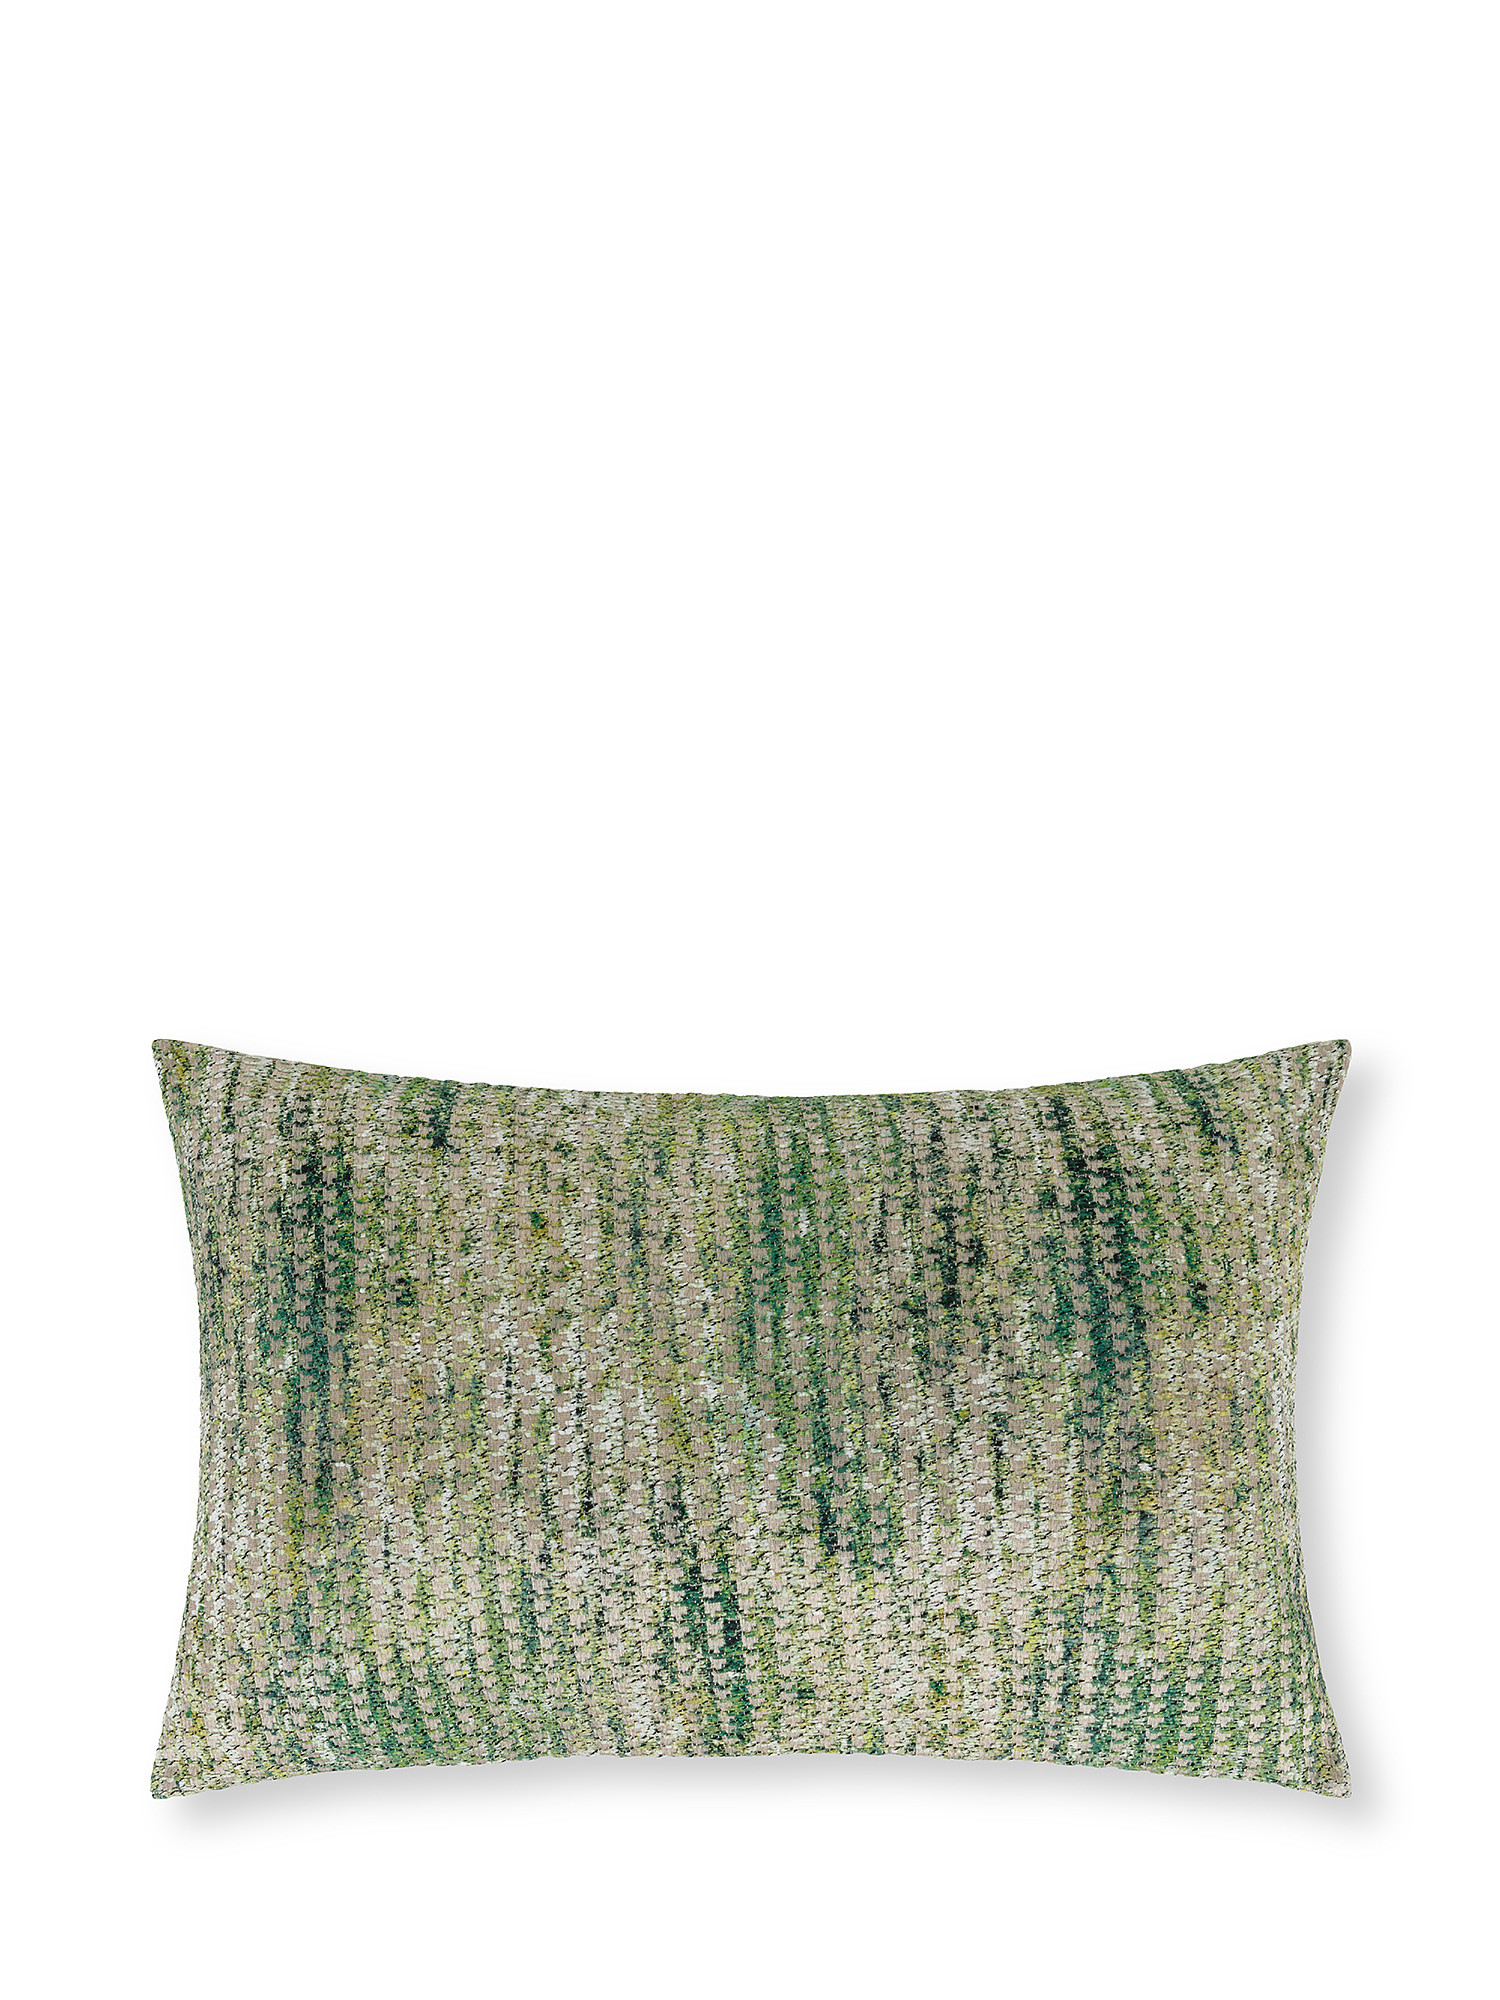 Jacquard cushion with camouflage motif 35x55cm, Green, large image number 0